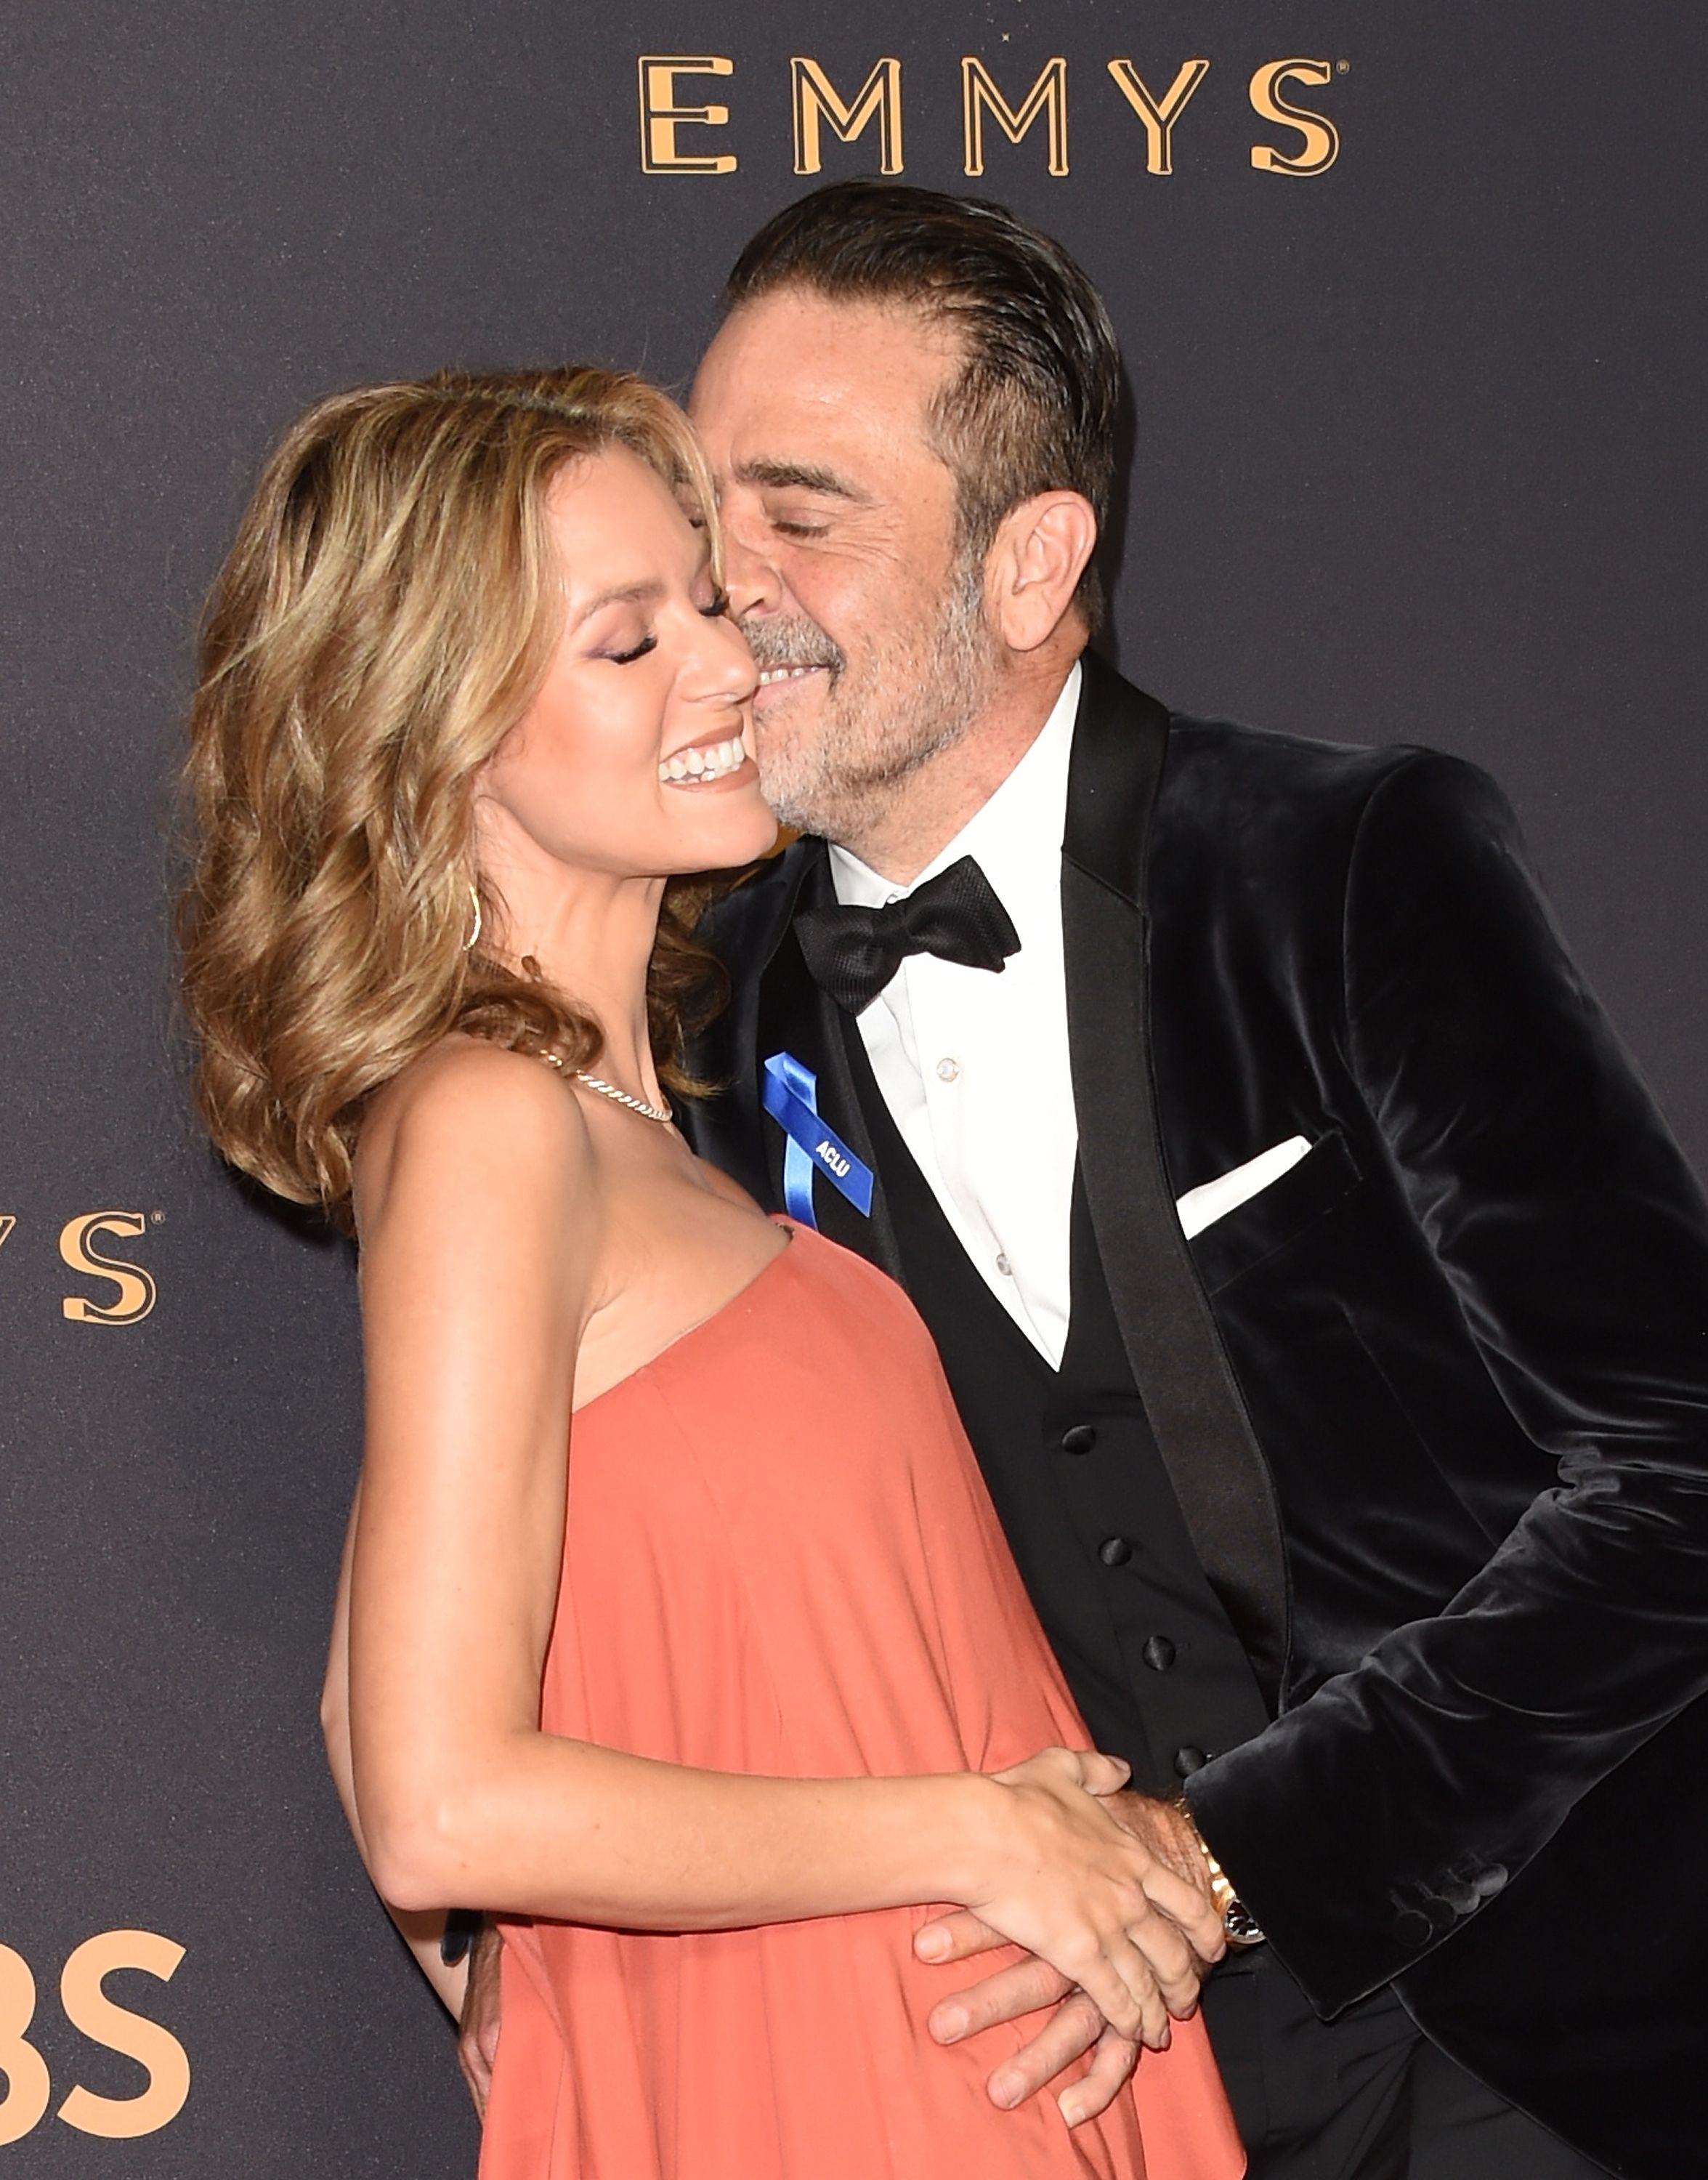 Jeffrey Dean Morgan and Hilarie Burton during the 69th Annual Primetime Emmy Awards on September 17, 2017 in Los Angeles, California. | Source: Getty Images